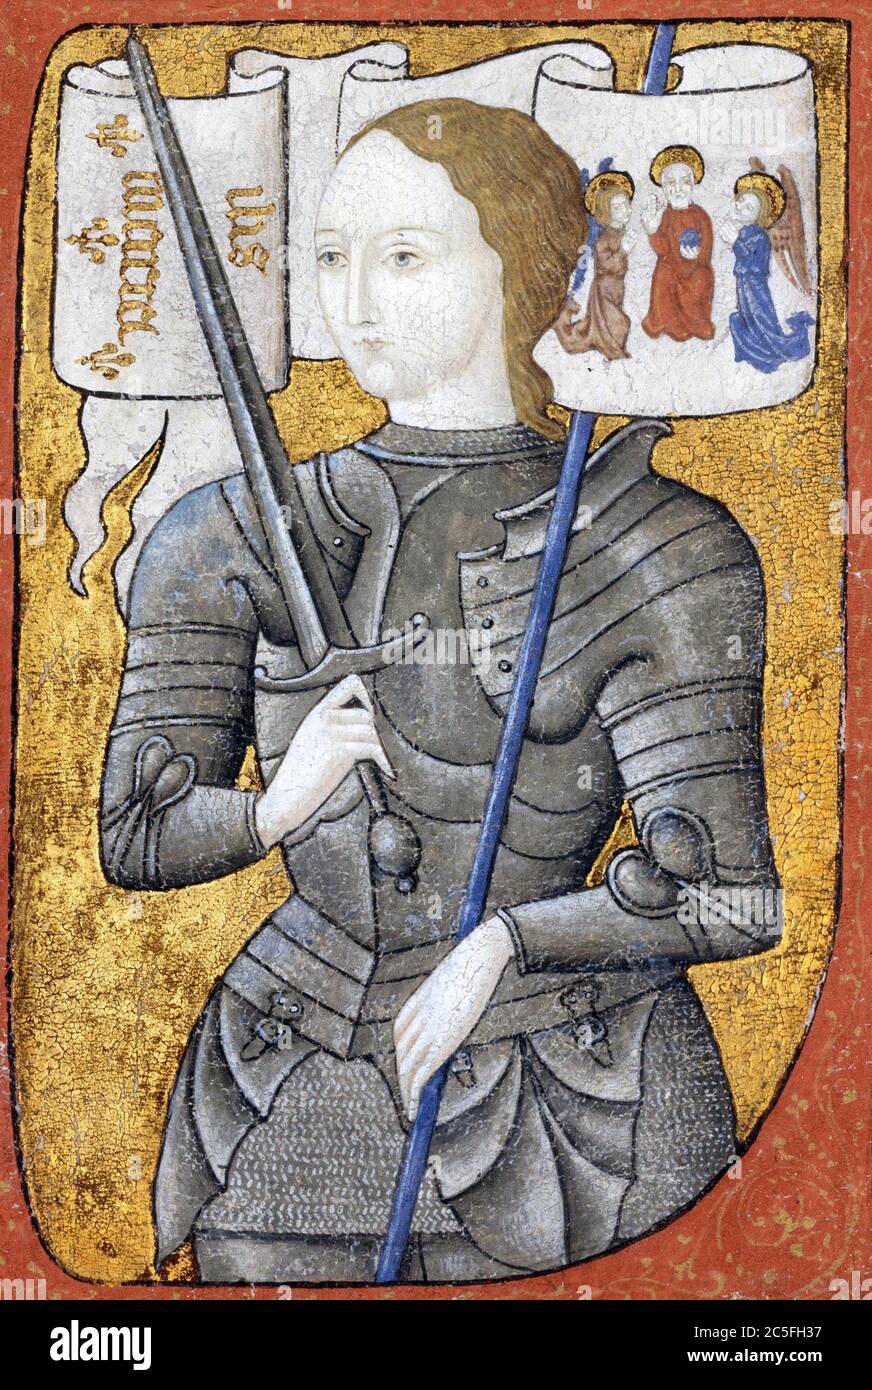 Joan of Arc (1412 – 1431) a heroine of France for her role during the Lancastrian phase of the Hundred Years' War, and was canonized as a Roman Catholic saint. Stock Photo